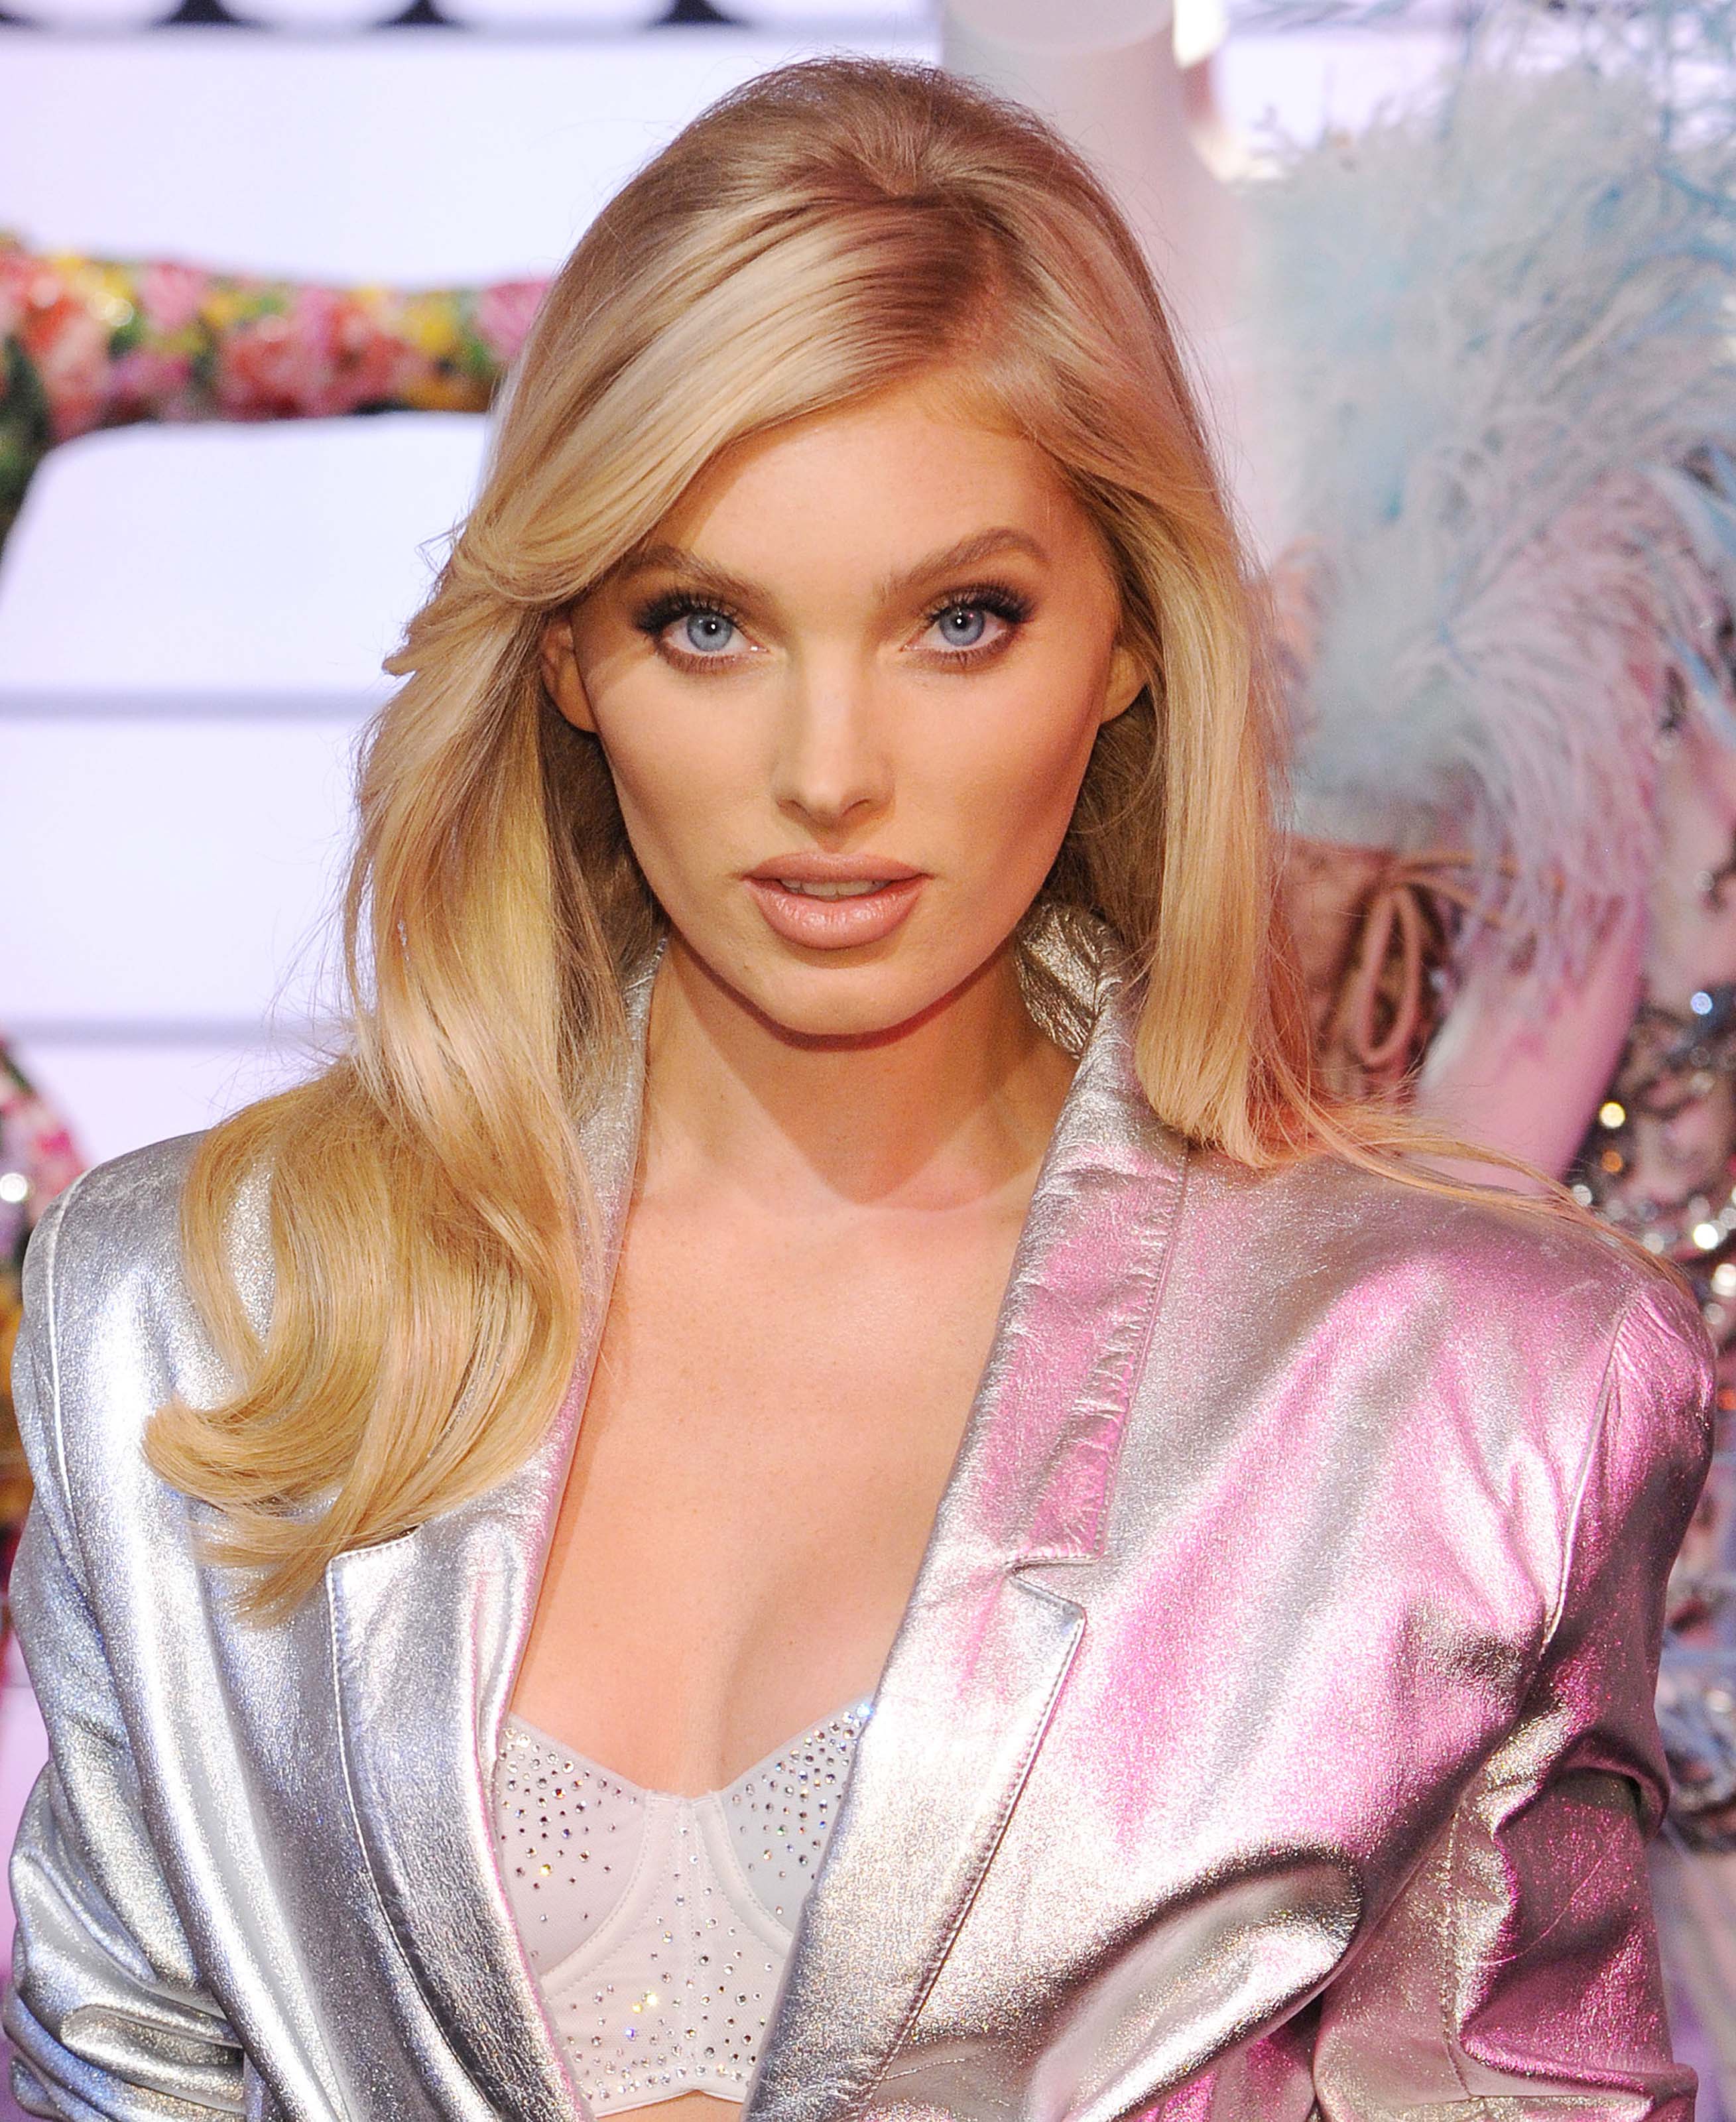 Elsa Hosk attends In New York City to Celebrate the Victoria Secret Fashion Show